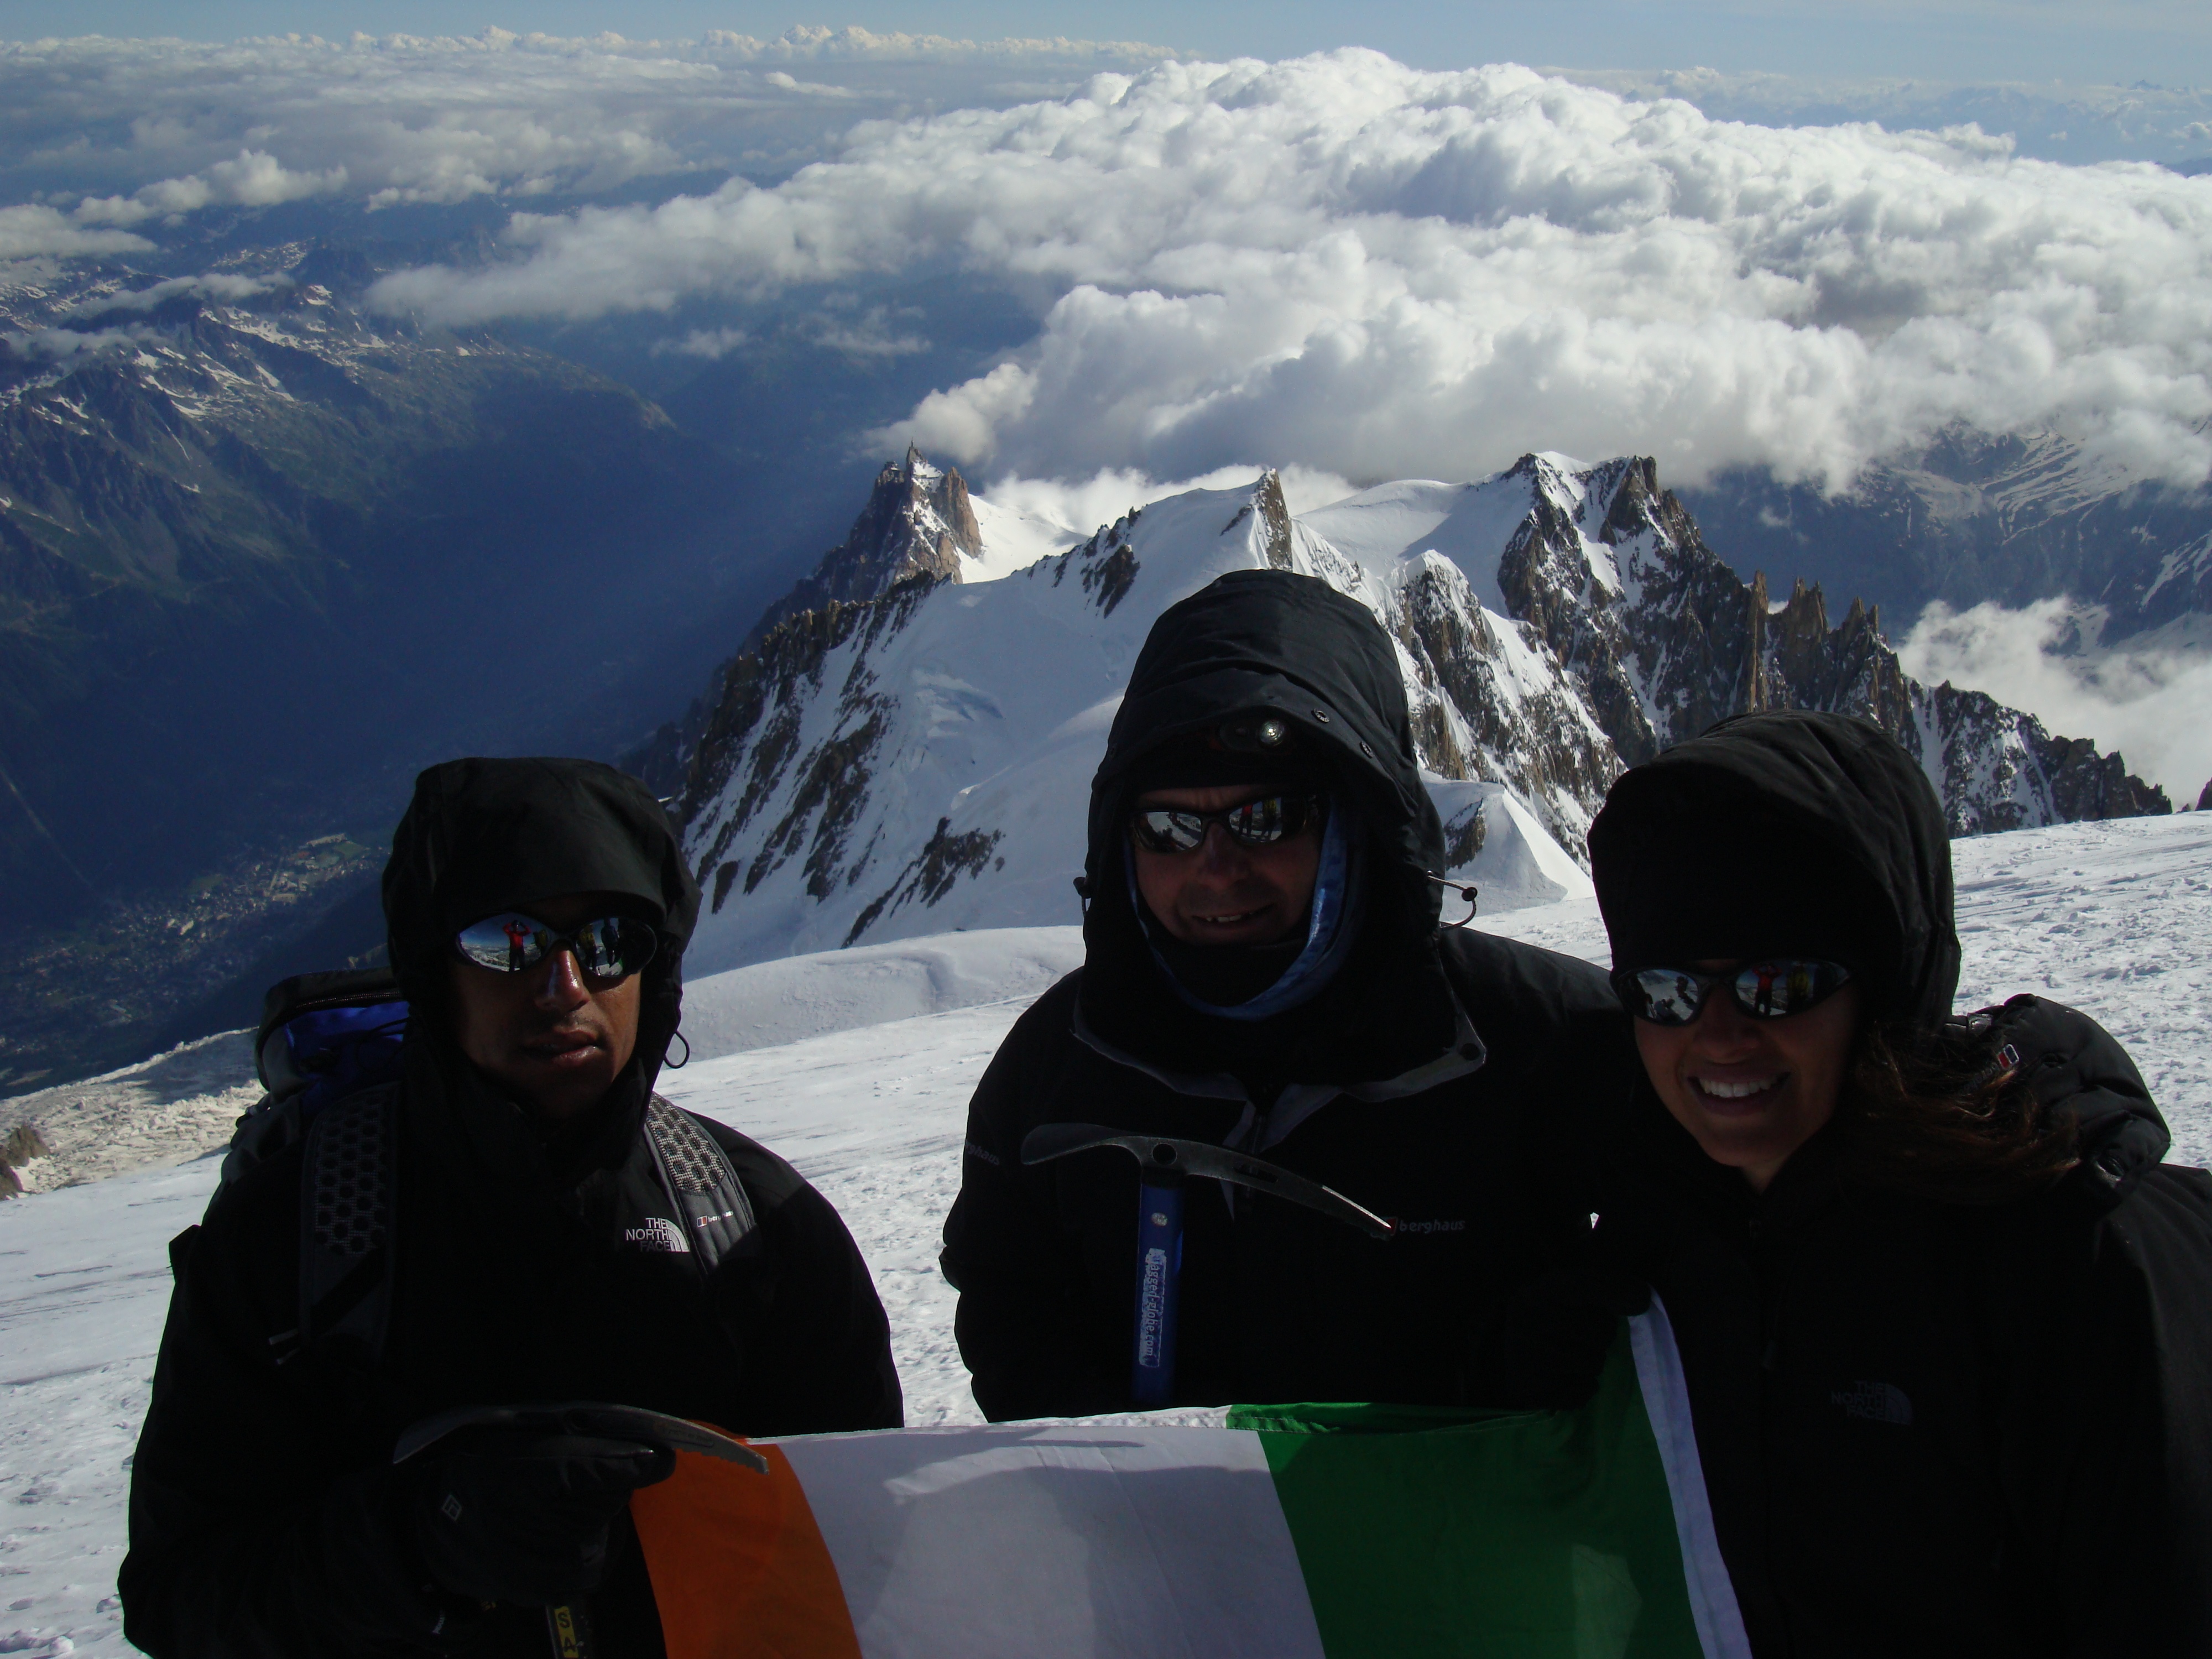 On the Summit of Mont Blanc